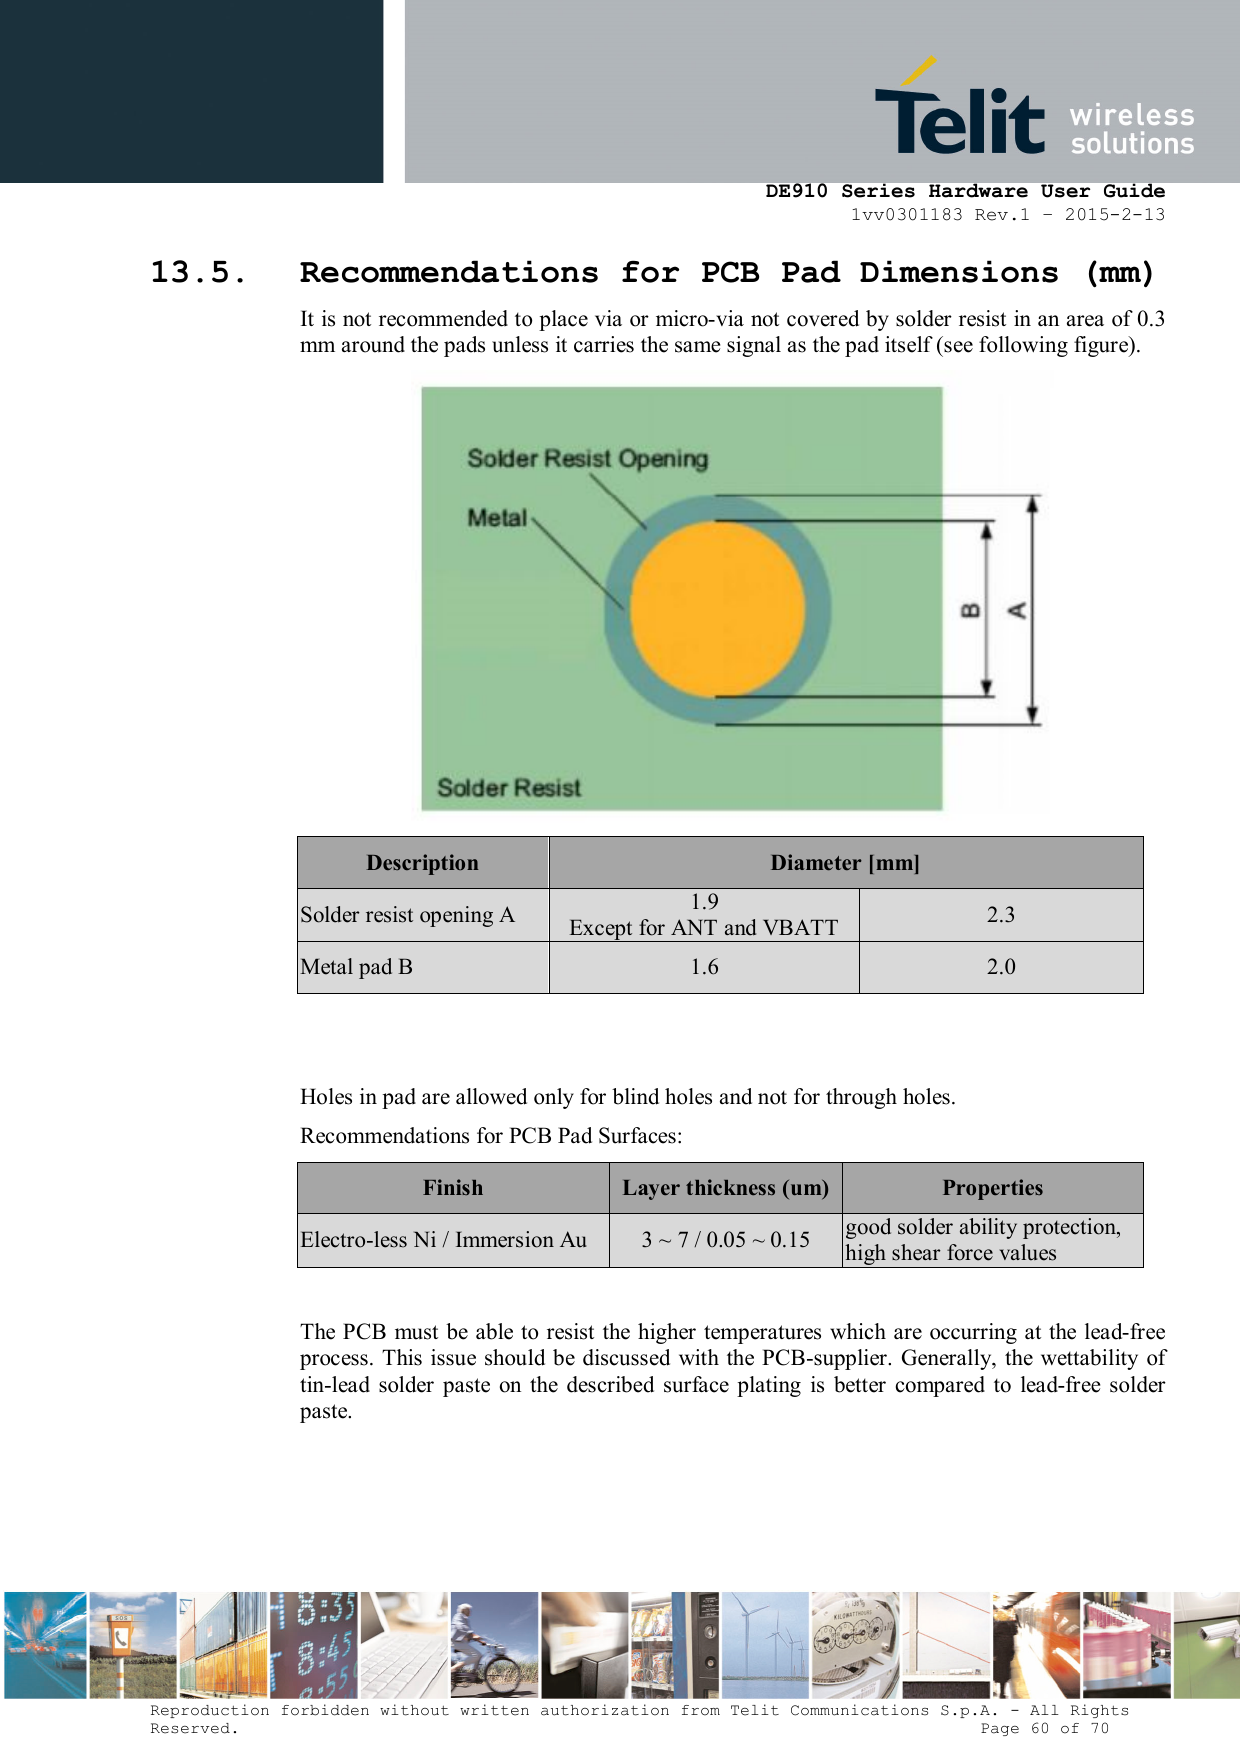      DE910 Series Hardware User Guide 1vv0301183 Rev.1 – 2015-2-13 Reproduction forbidden without written authorization from Telit Communications S.p.A. - All Rights Reserved.                                                                          Page 60 of 70 13.5. Recommendations for PCB Pad Dimensions (mm) It is not recommended to place via or micro-via not covered by solder resist in an area of 0.3 mm around the pads unless it carries the same signal as the pad itself (see following figure).  Description  Diameter [mm] Solder resist opening A 1.9 Except for ANT and VBATT  2.3 Metal pad B  1.6  2.0   Holes in pad are allowed only for blind holes and not for through holes. Recommendations for PCB Pad Surfaces: Finish  Layer thickness (um) Properties Electro-less Ni / Immersion Au  3 ~ 7 / 0.05 ~ 0.15 good solder ability protection, high shear force values  The PCB must be able to resist the higher  temperatures which are occurring at the lead-free process. This issue should be discussed with the  PCB-supplier.  Generally, the wettability  of tin-lead  solder  paste  on  the  described  surface  plating  is  better  compared  to  lead-free  solder paste.  